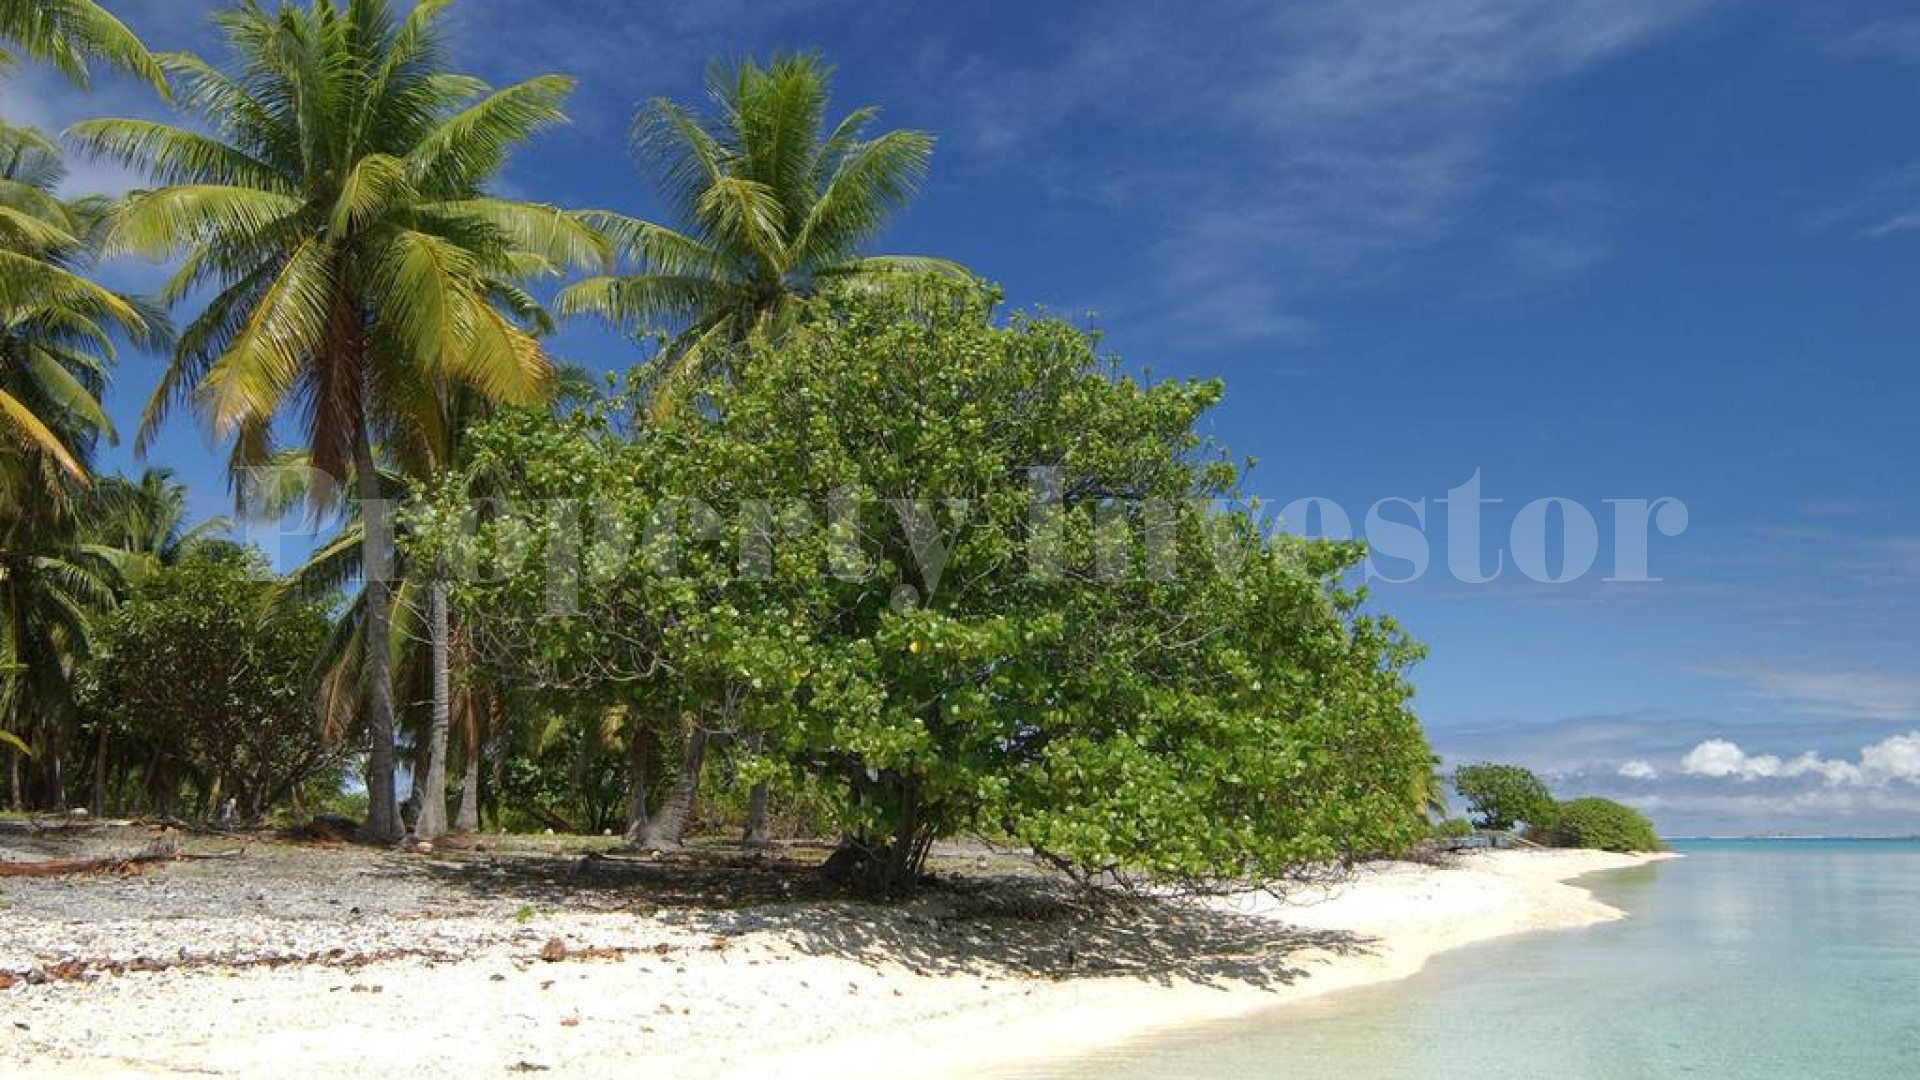 Private Virgin Island for Sale in French Polynesia